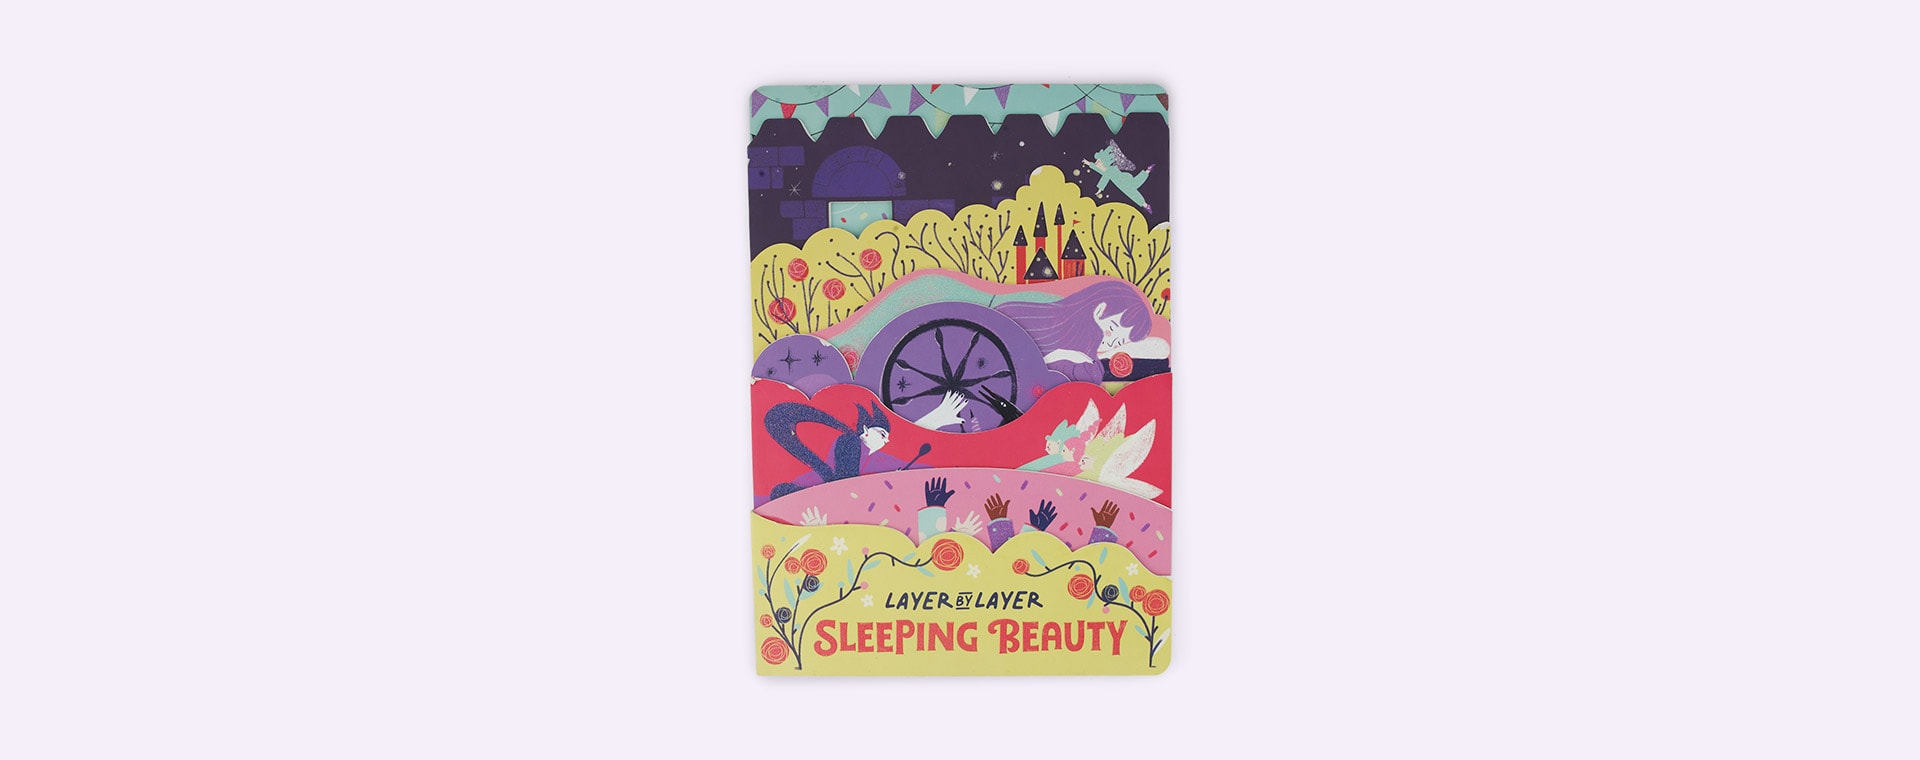 Layer by Layer Sleeping beauty bookspeed Layer By Layer Sleeping Beauty